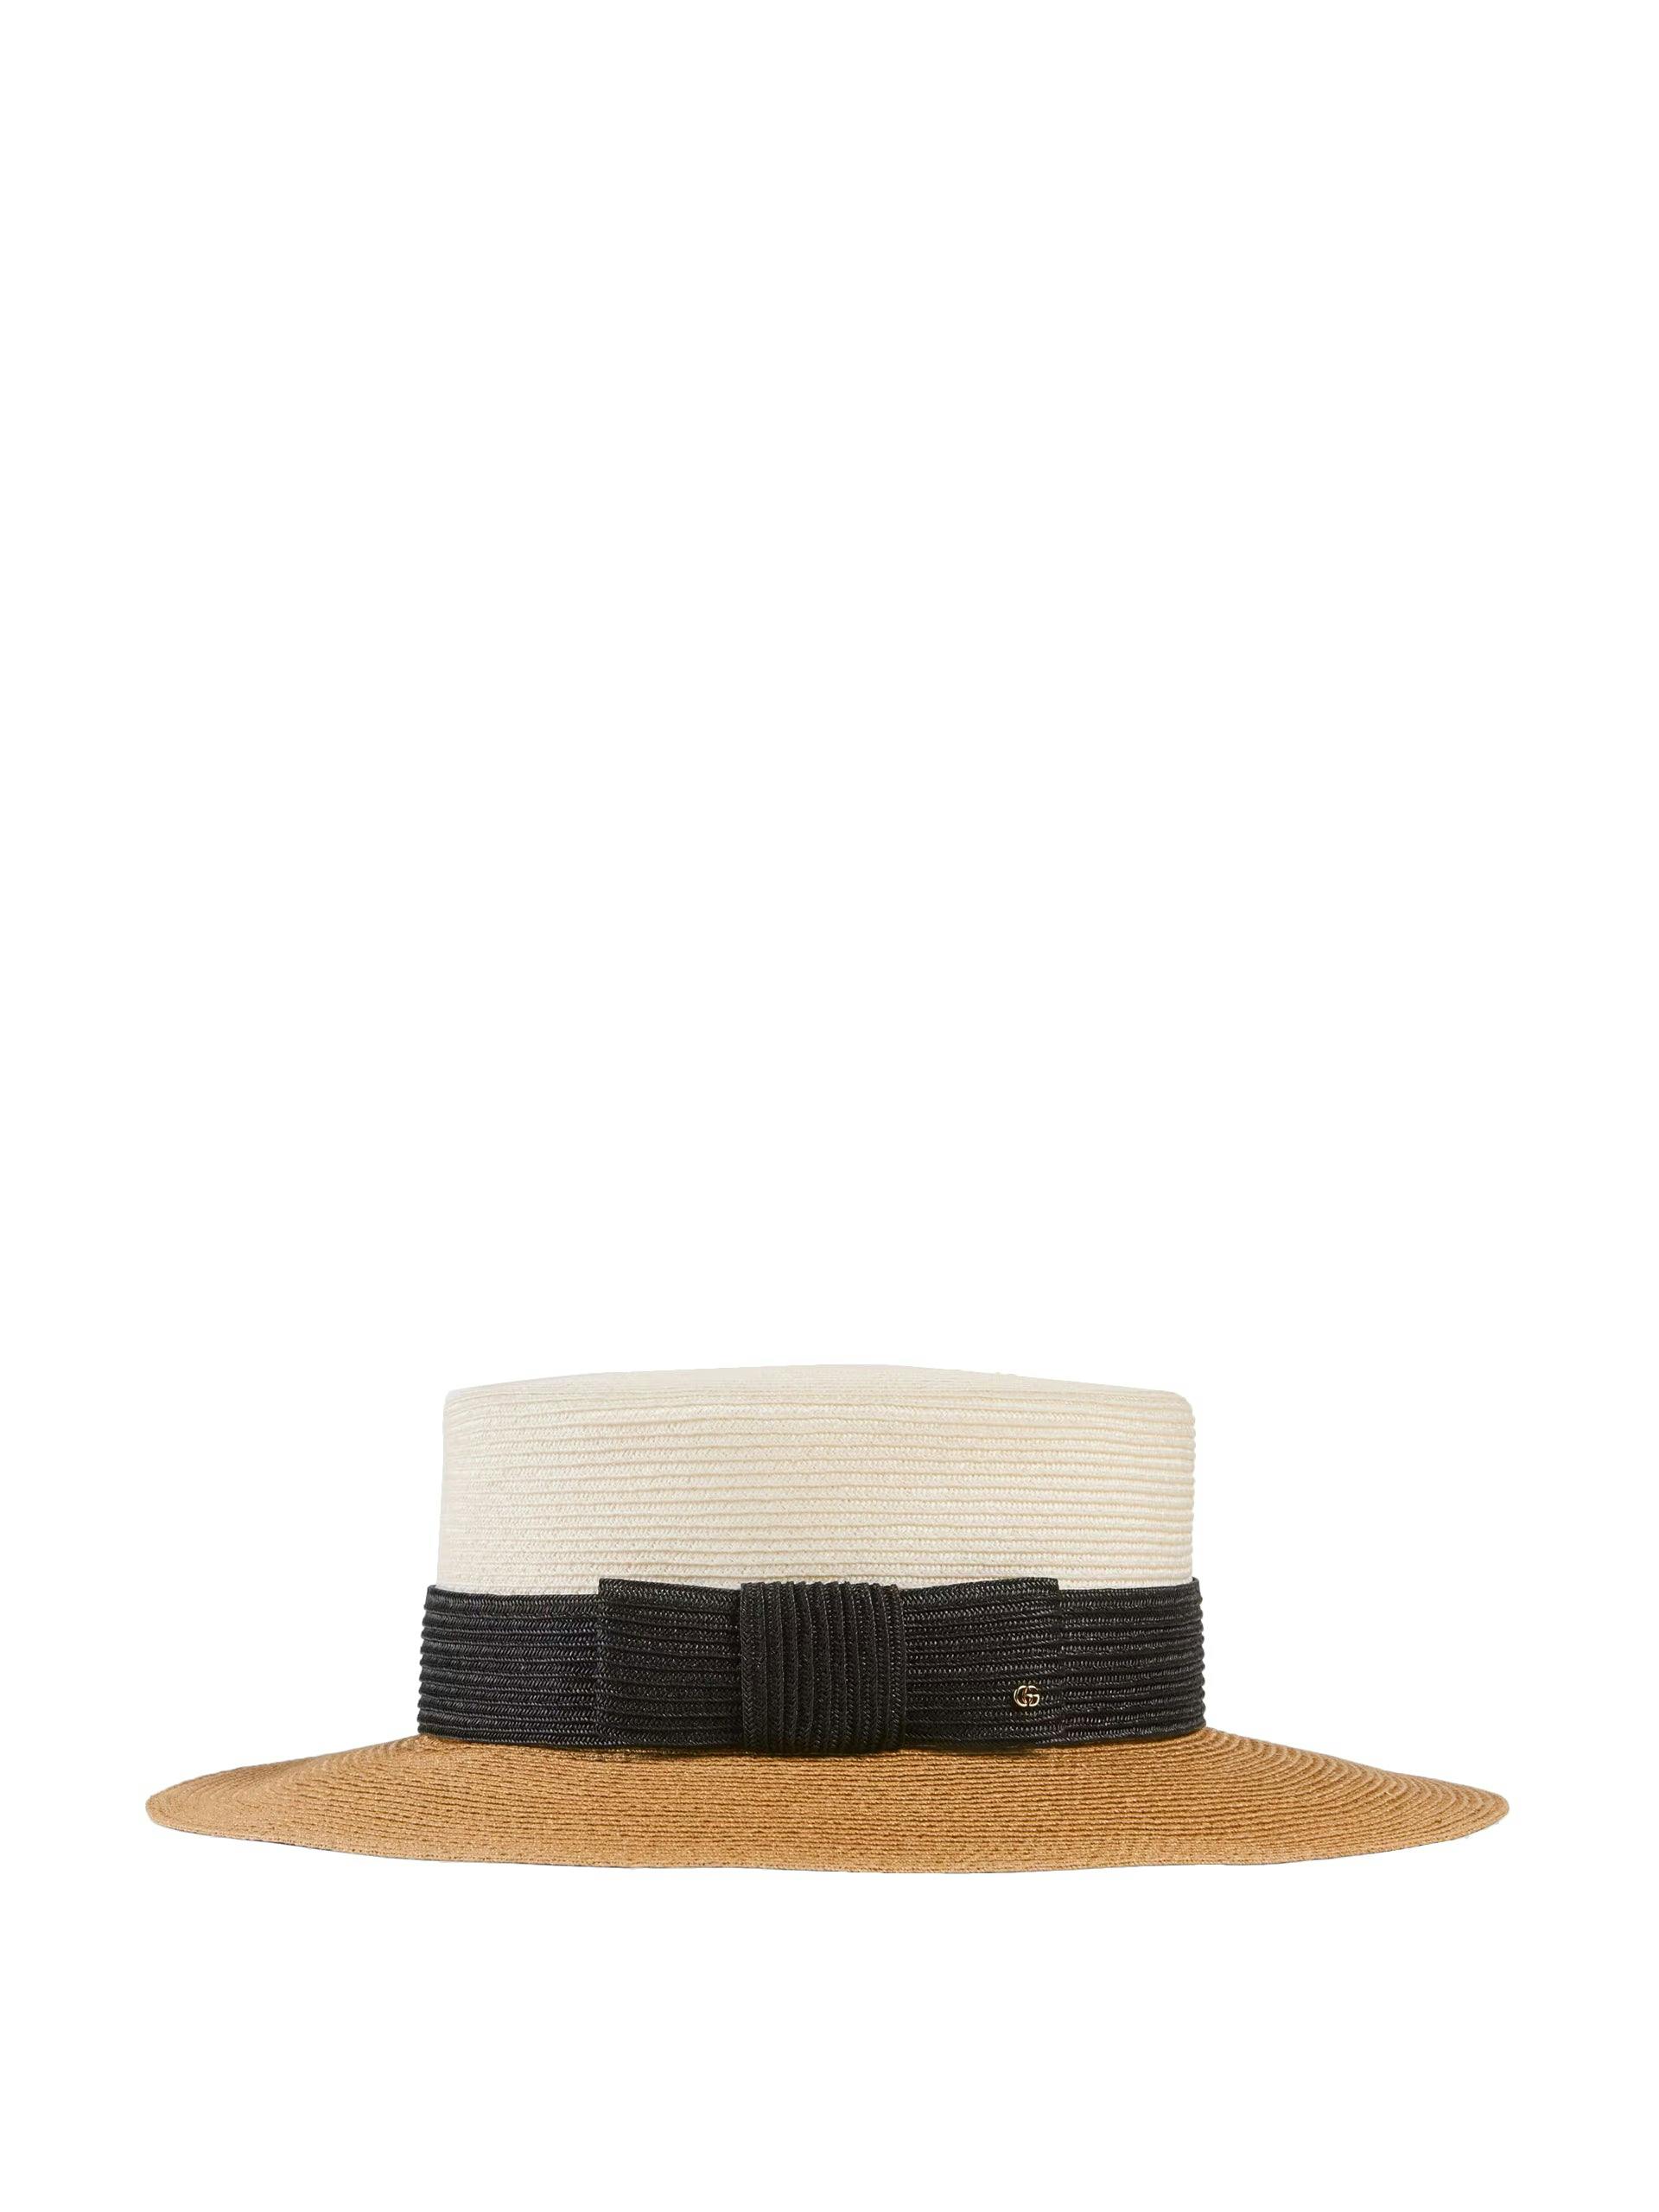 Straw-effect wide brim hat with bow